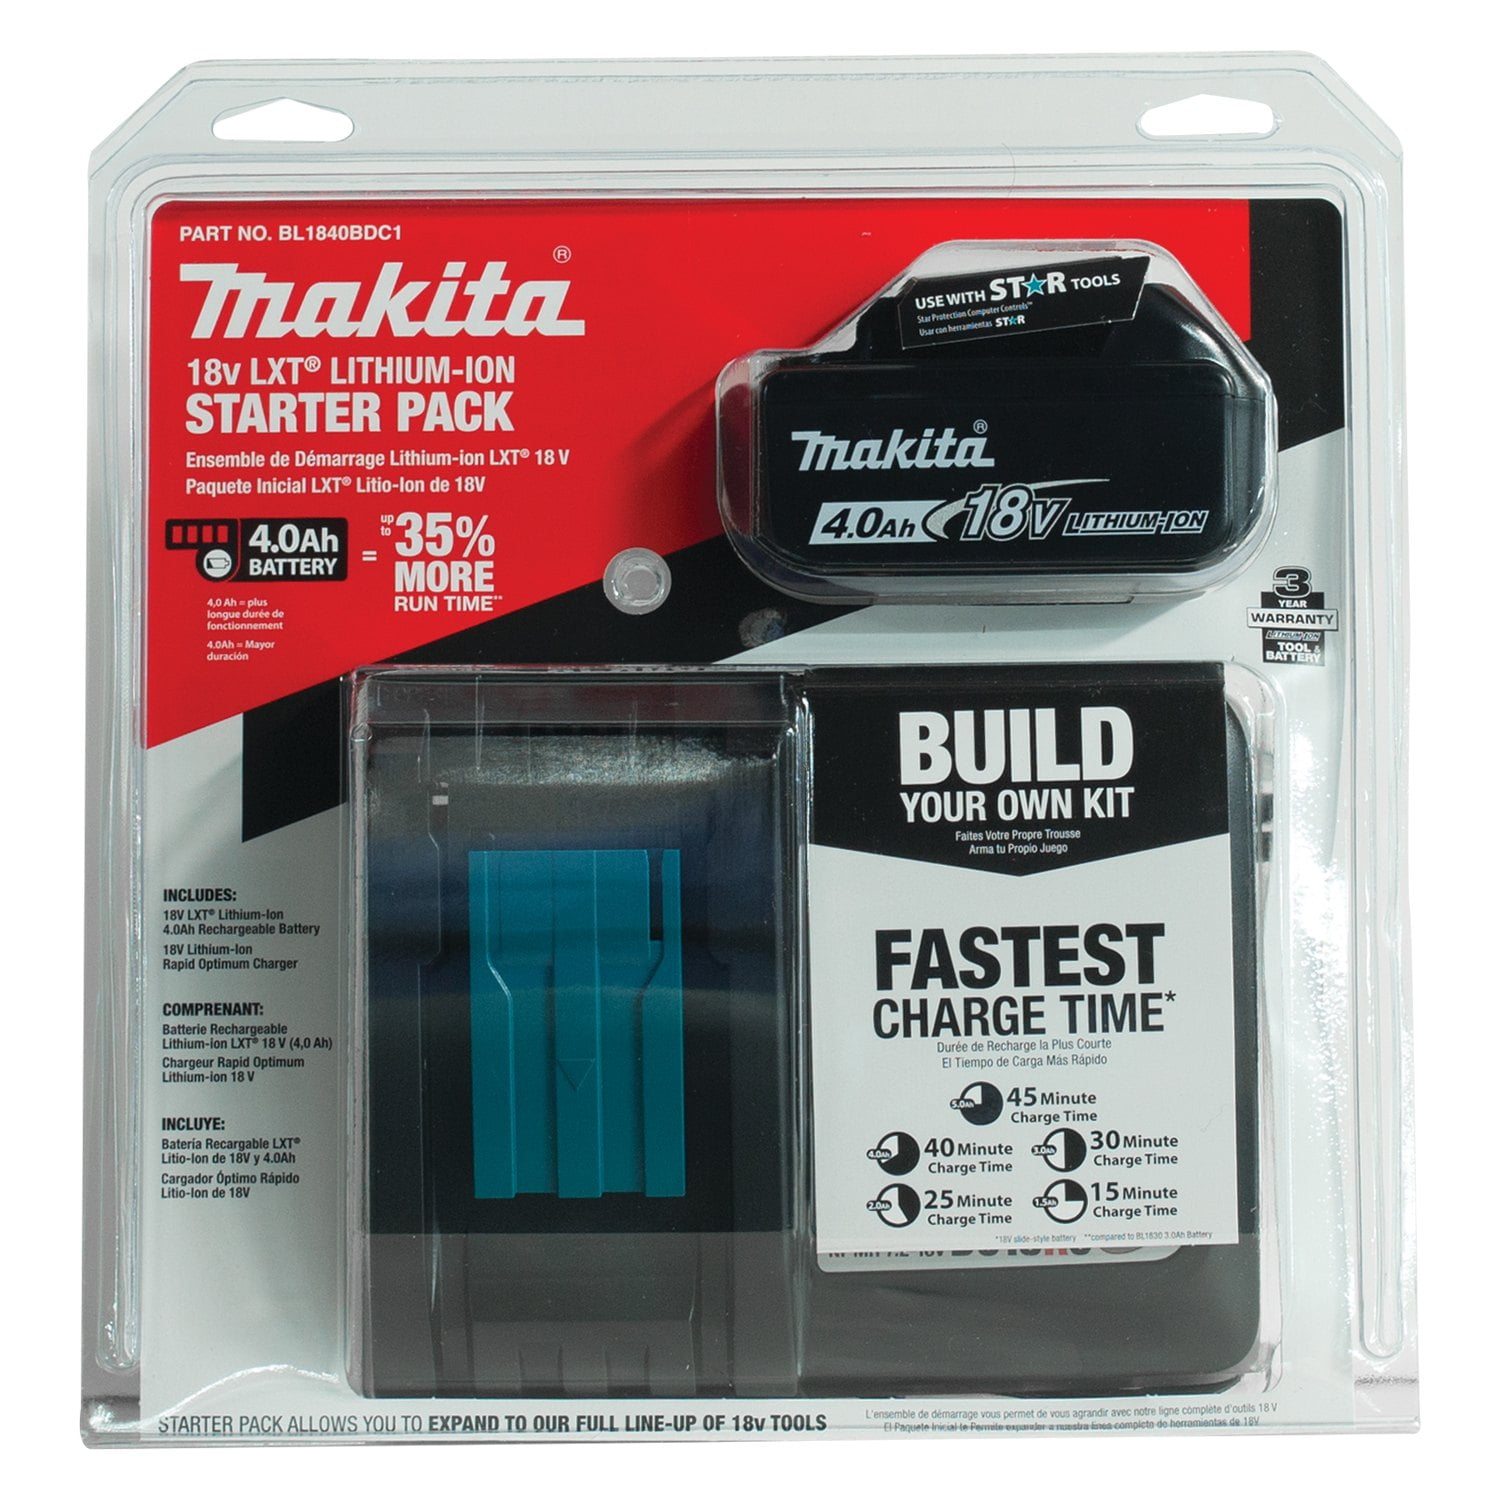 Makita BL1820B-2 18V LXT Lithium-Ion Battery - Pack of 2 for sale